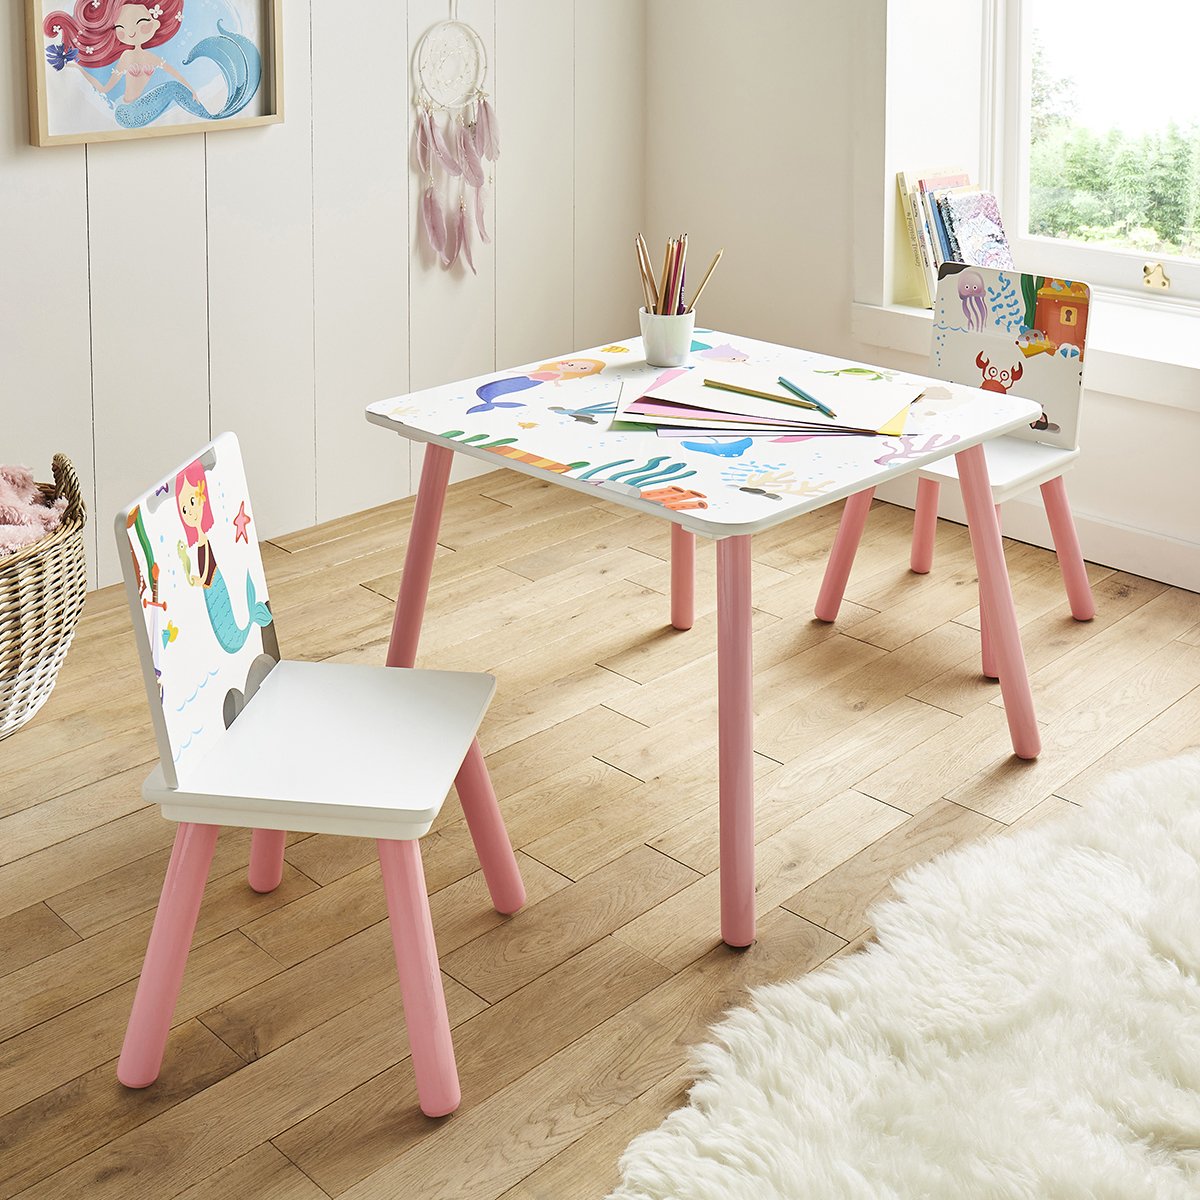 Mermaid Design Children's Table and Chairs Set